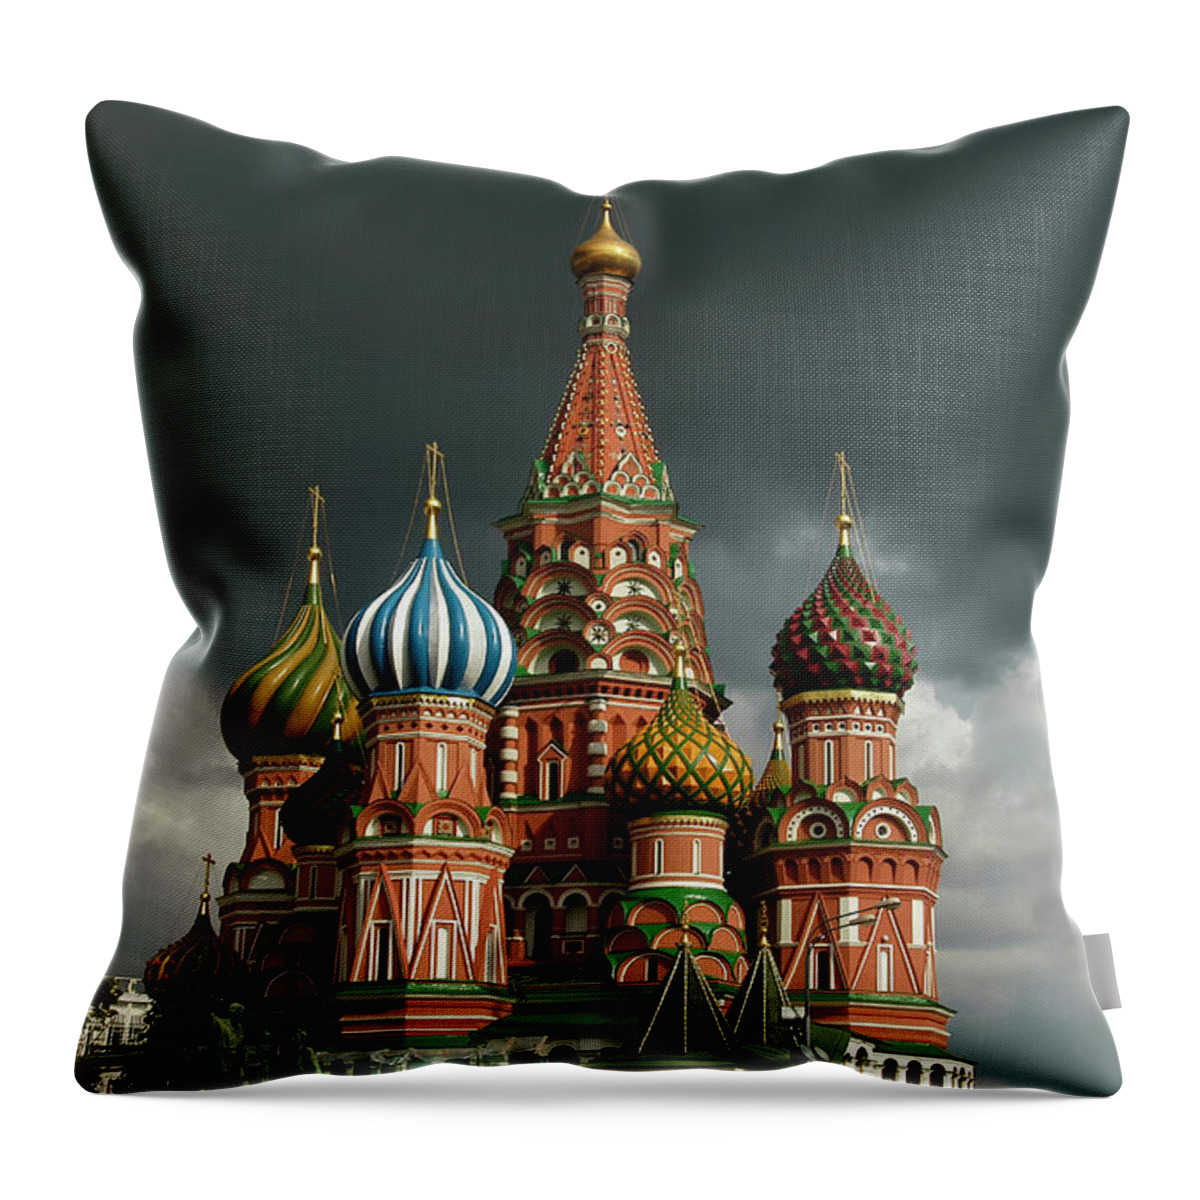 Treetop Throw Pillow featuring the photograph Cathedral Of Saint Basil The Blessed In by Izzet Keribar